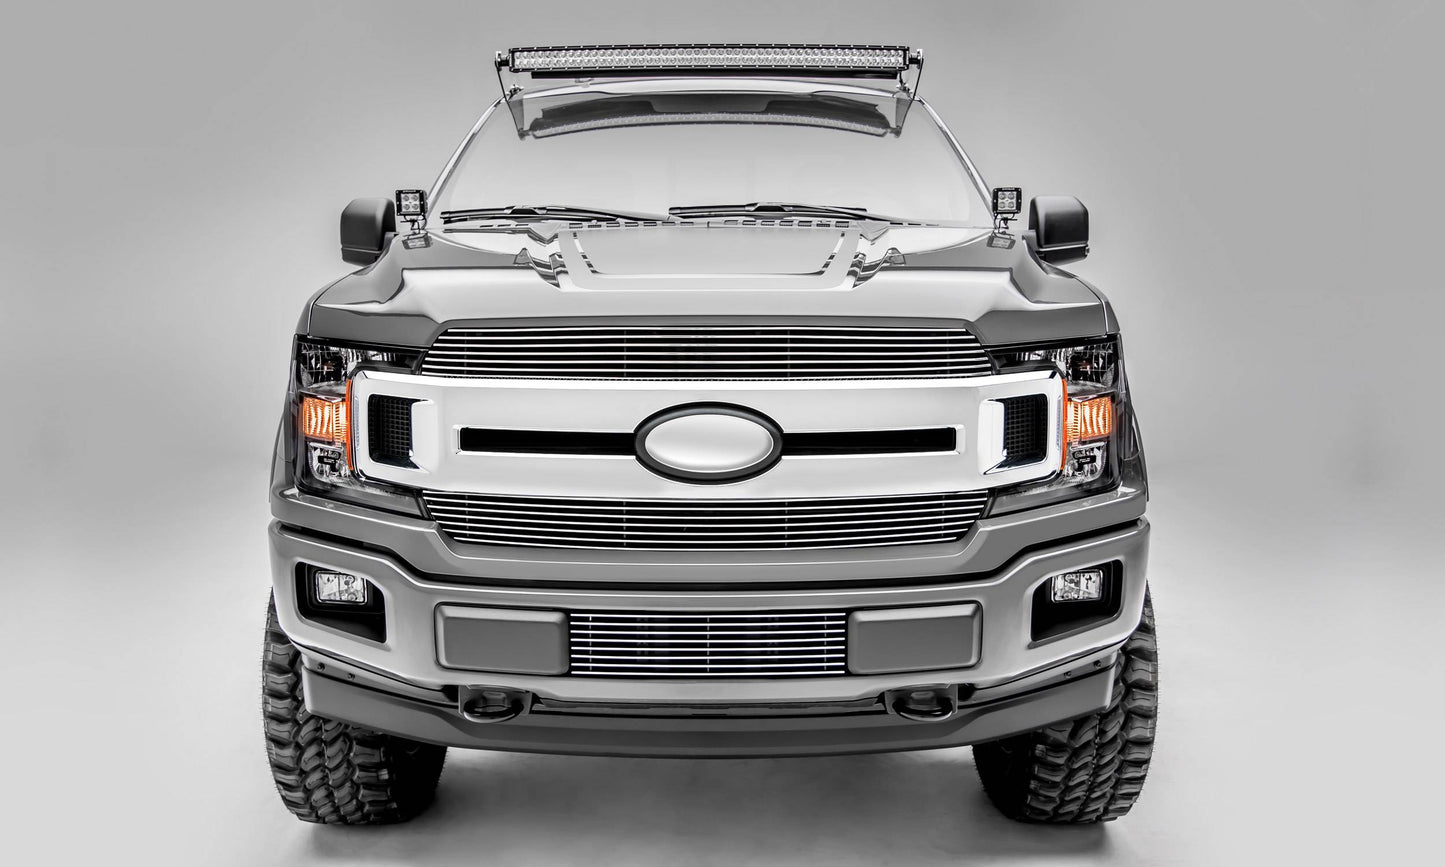 T-REX Grilles 20571 Polished Aluminum Horizontal Grille Fits 2018-2020 Ford F-150 XLT F-150 Lariat